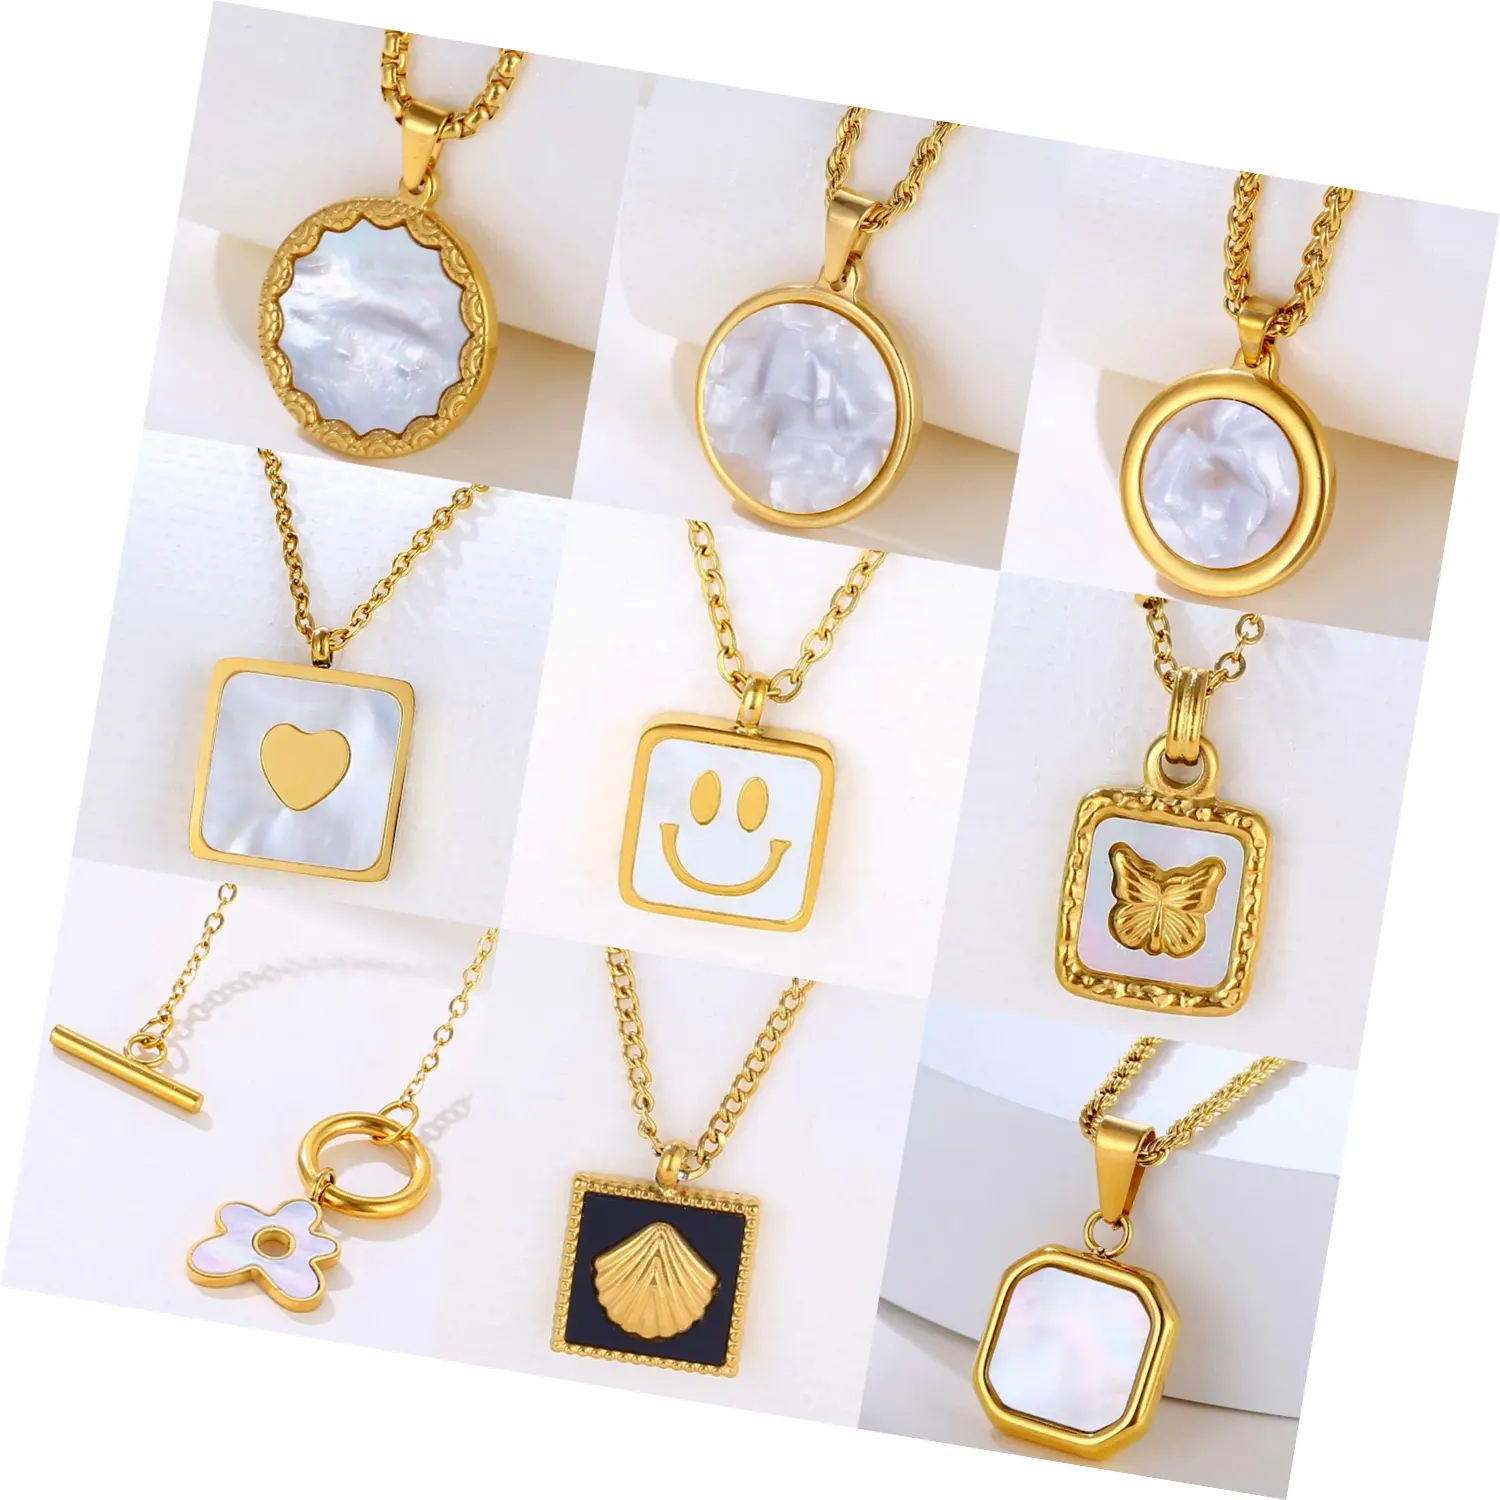 Waterproof Fashion Gold Natural White Mother of Pearl Shell Smile Face Jewelry Girls Stainless Steel Opal Pendant Necklace